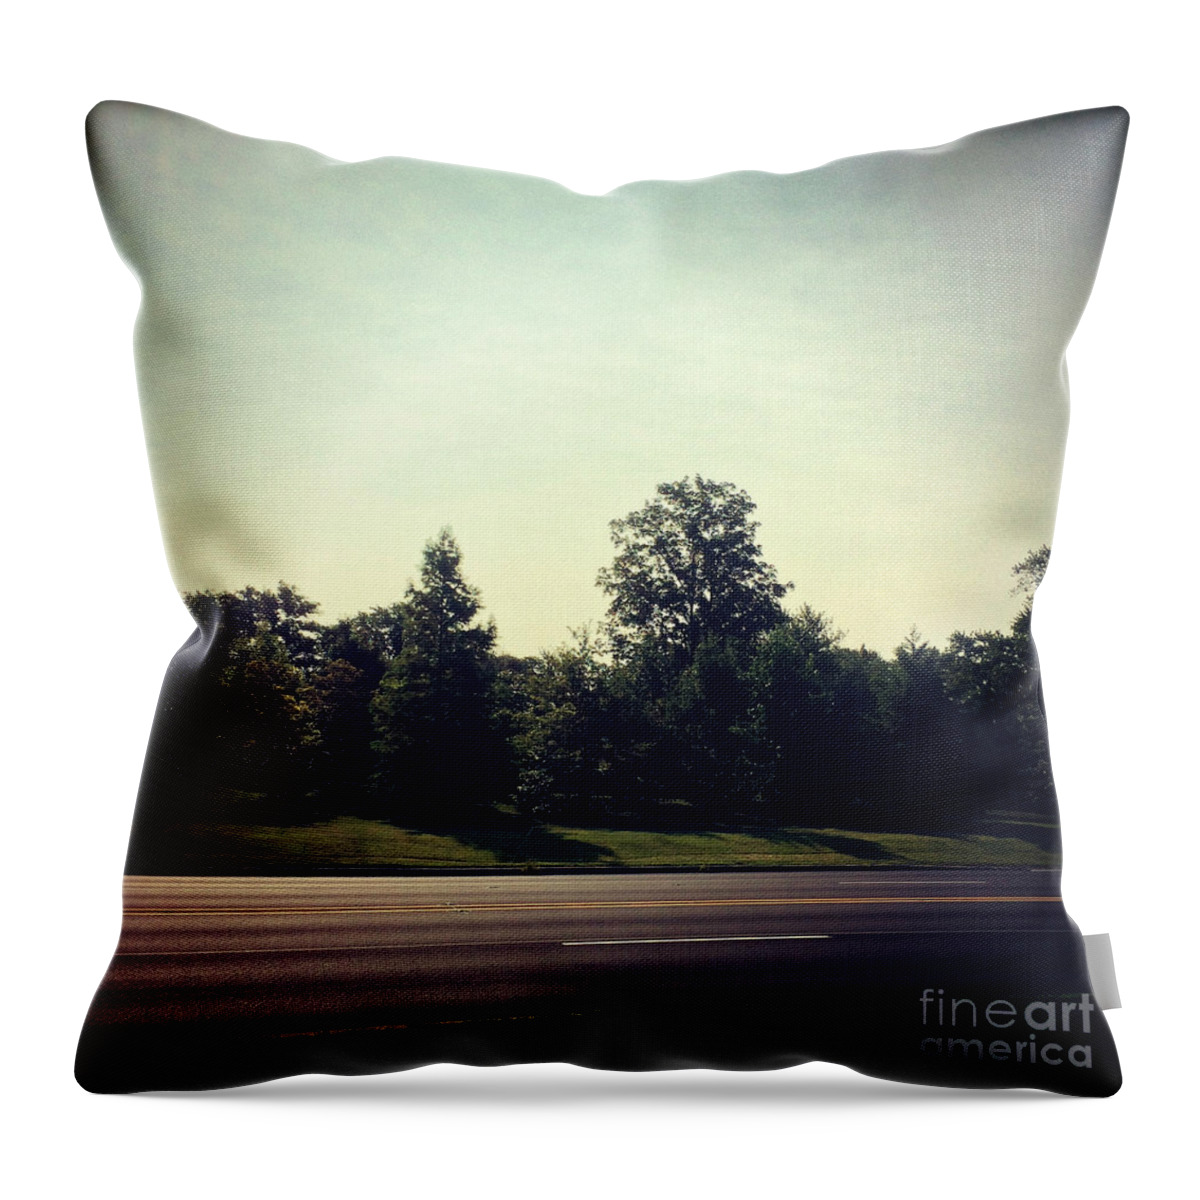 Square Format Throw Pillow featuring the photograph Roadside Trees by Frank J Casella